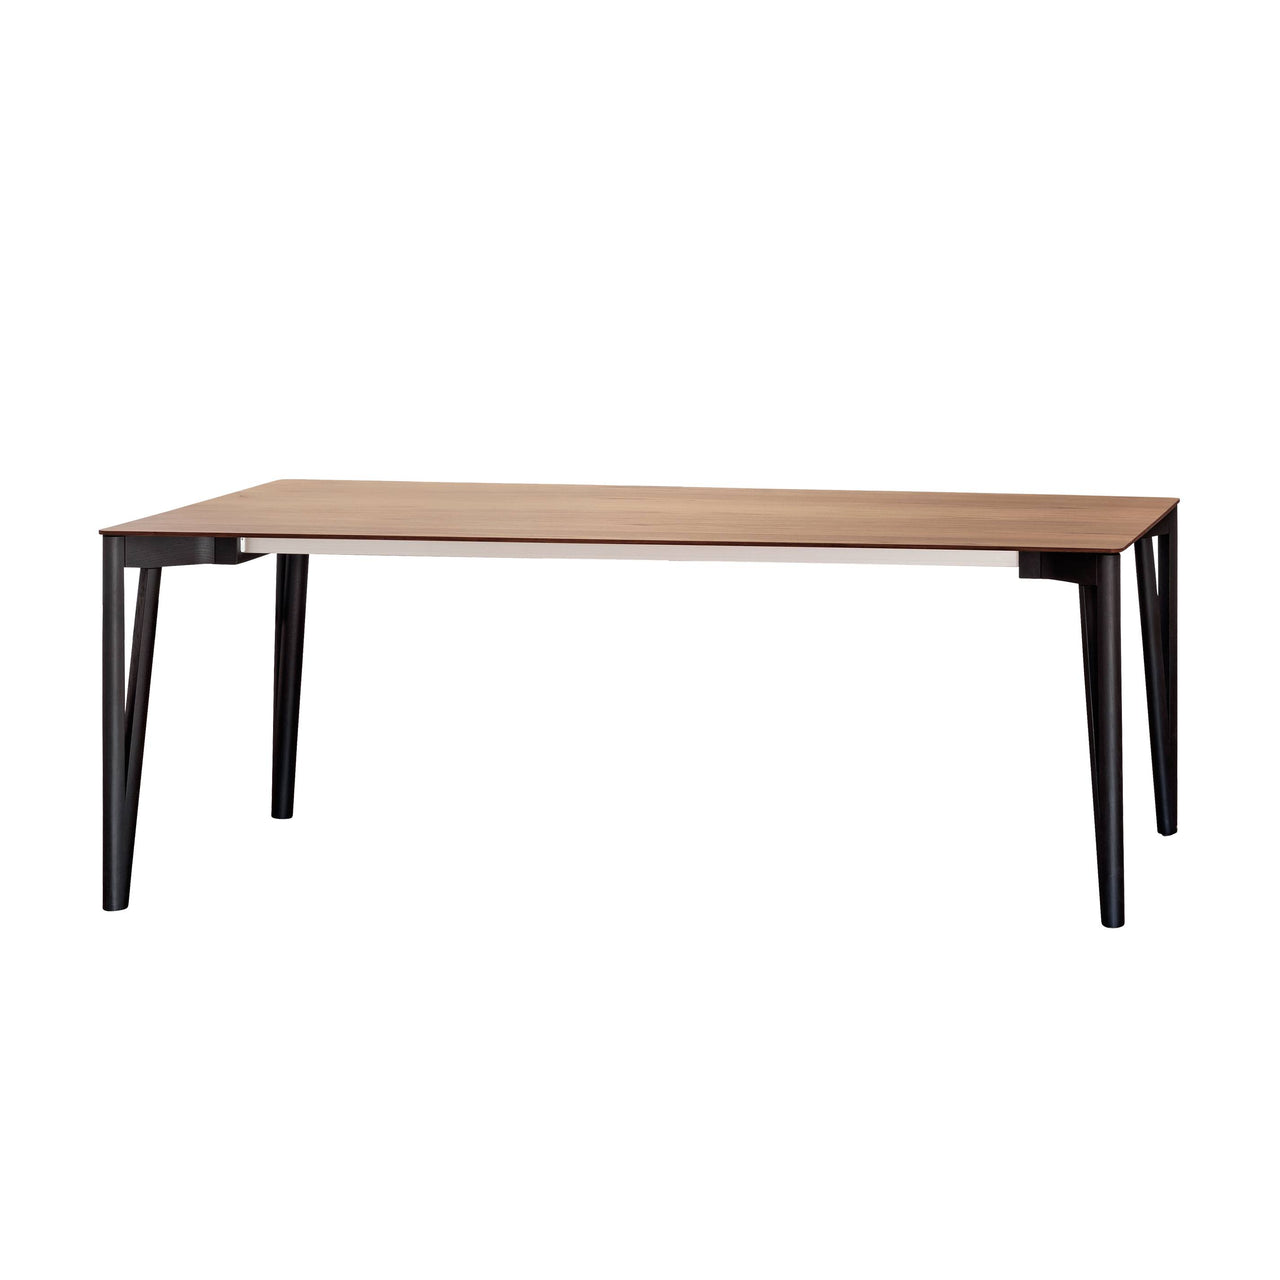 Decapo Dining Table: Small + Canaletto Walnut + Black Aniline